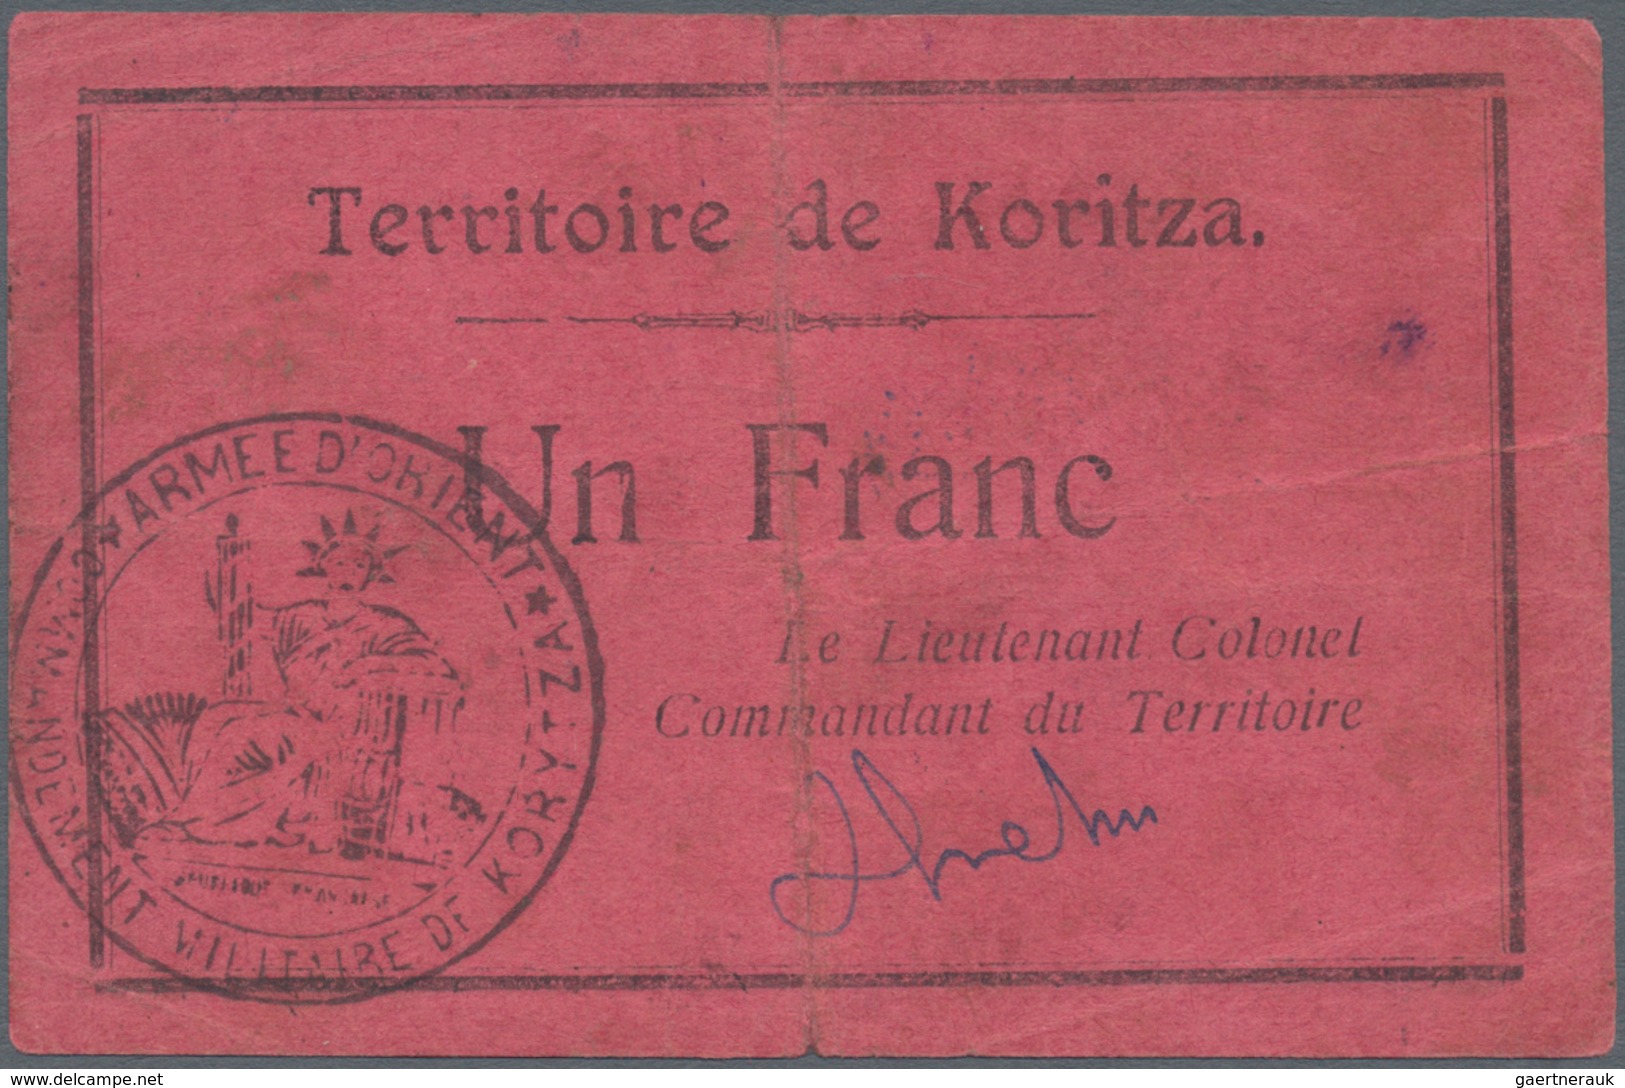 Albania / Albanien: 1 Frange 1920 P. S154, Used With Folds And Creases, Stronger Center Fold Causing - Albania